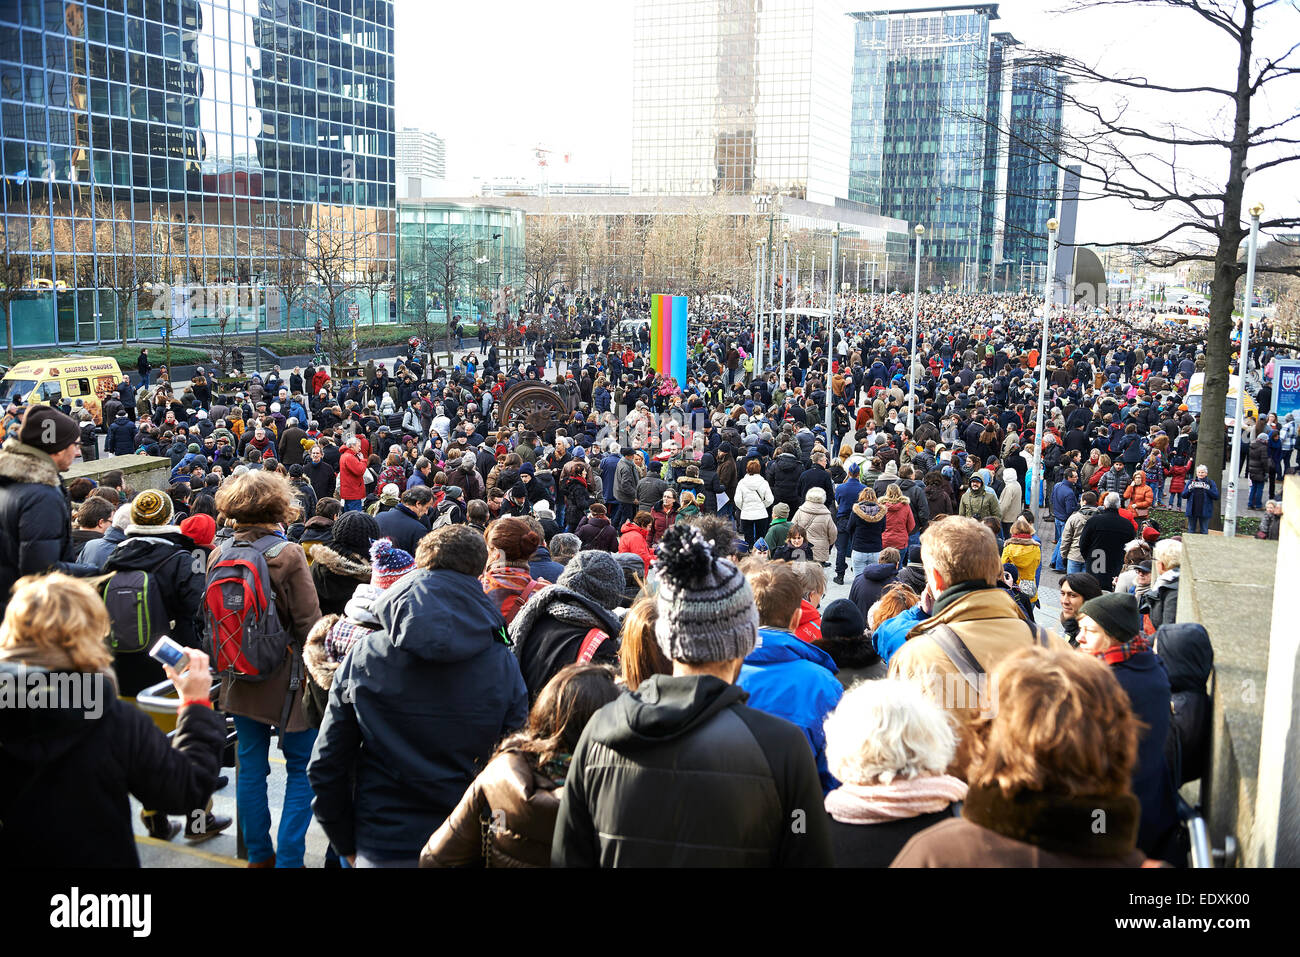 Brussels, Belgium. 11th Jan, 2015. The Brussels event against terrorism and support for freedom of expression after the attacks against the magazine Charlie hebdo Credit:  Bombaert Patrick/Alamy Live News Stock Photo